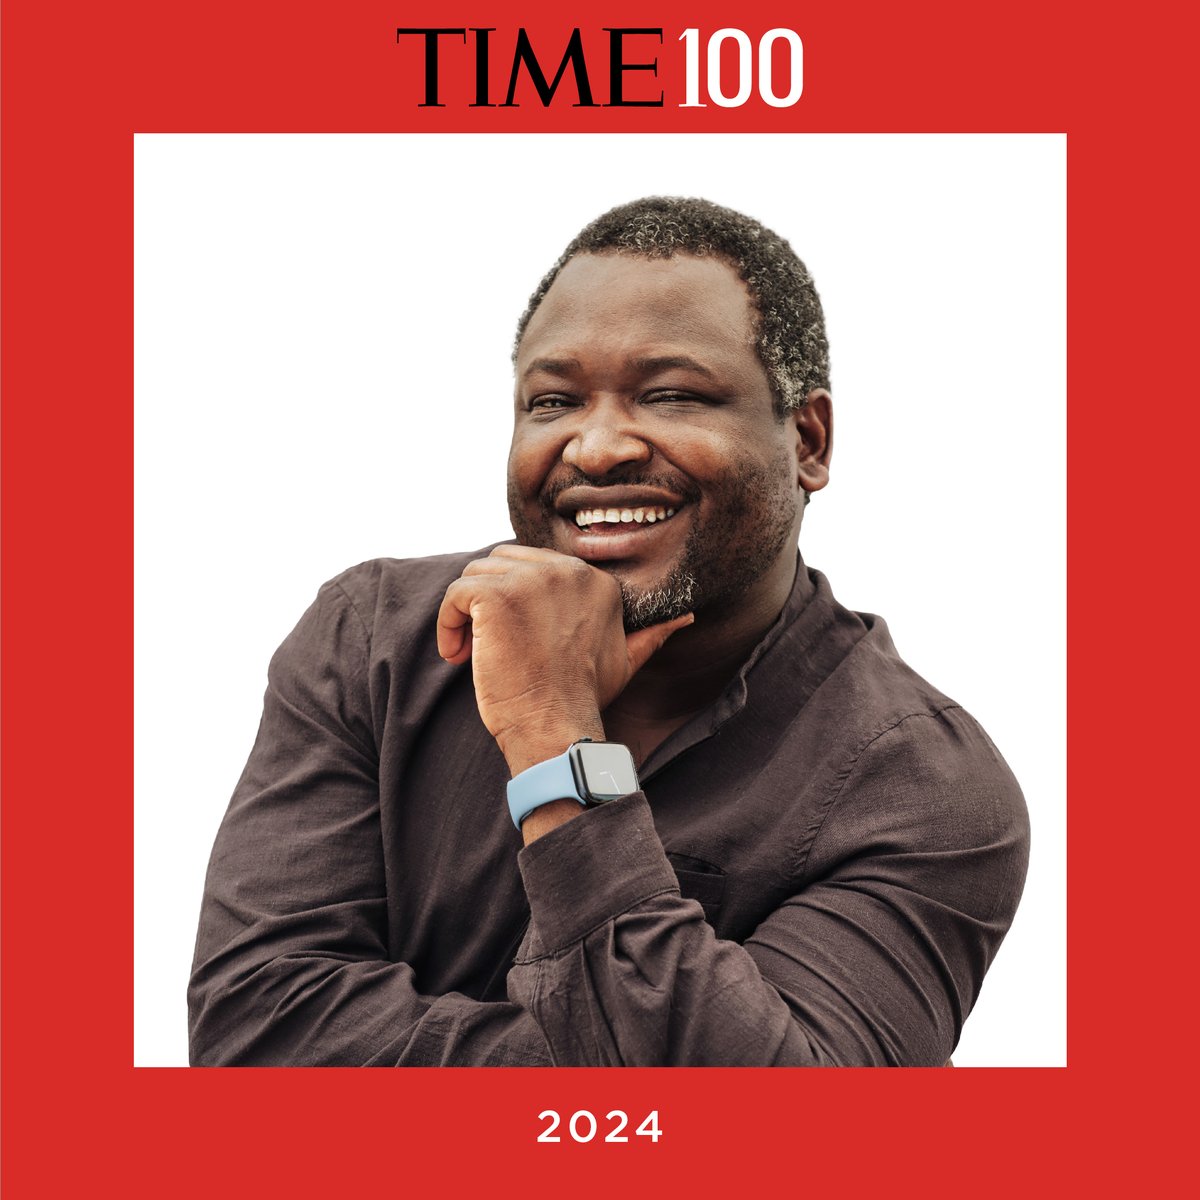 We are proud that our CEO, @KennedyOdede has made it onto the 2024 #TIME100 list of the Most Influential People. This recognition is not just a reflection of CEO's efforts, but of the collective effort, dedication, and resilience of every member of our SHOFCO community.